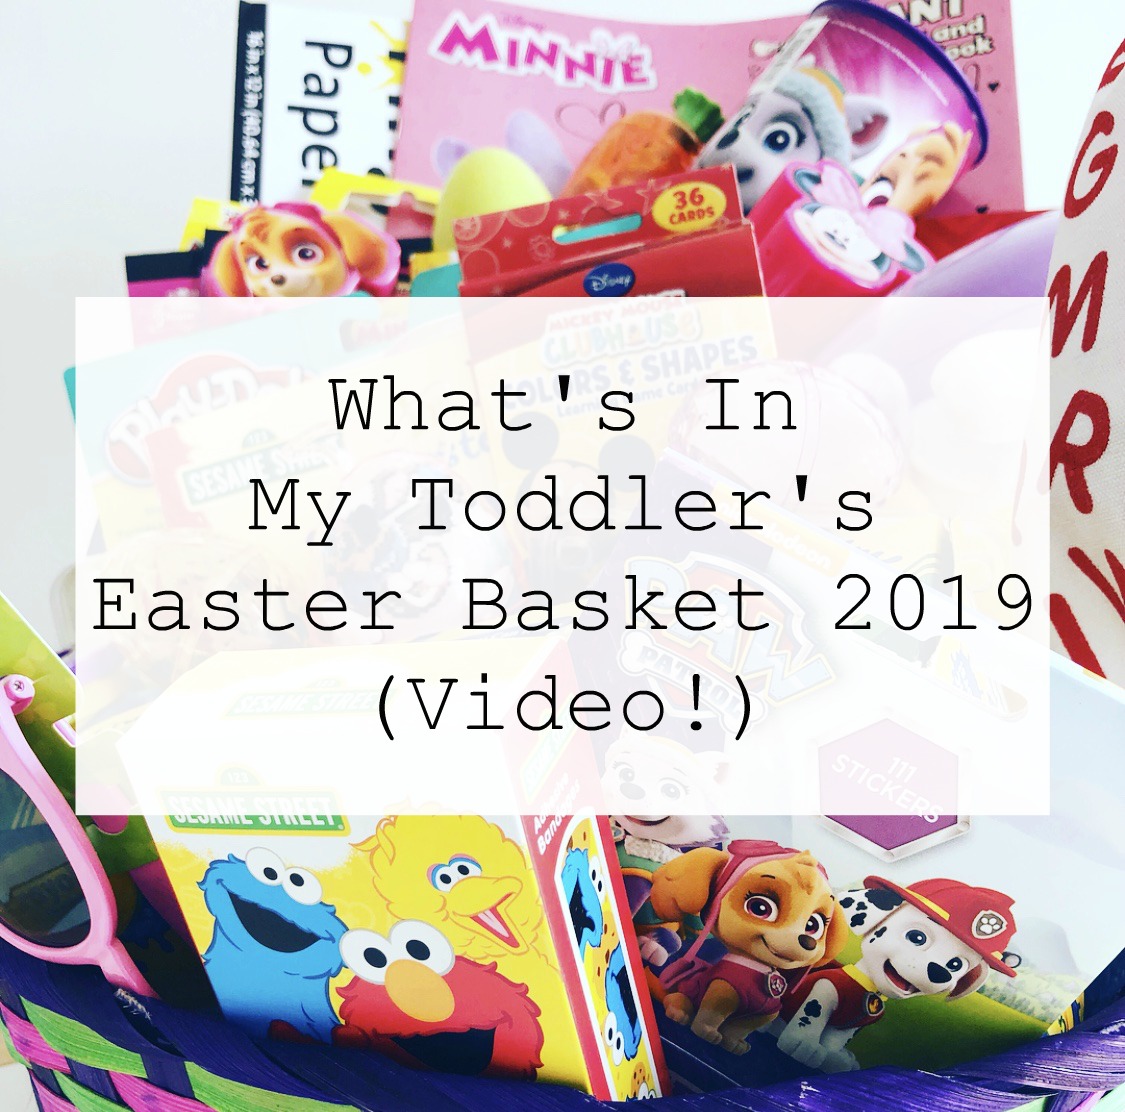 What's In My Toddler's Easter Basket 2019 (Video!)